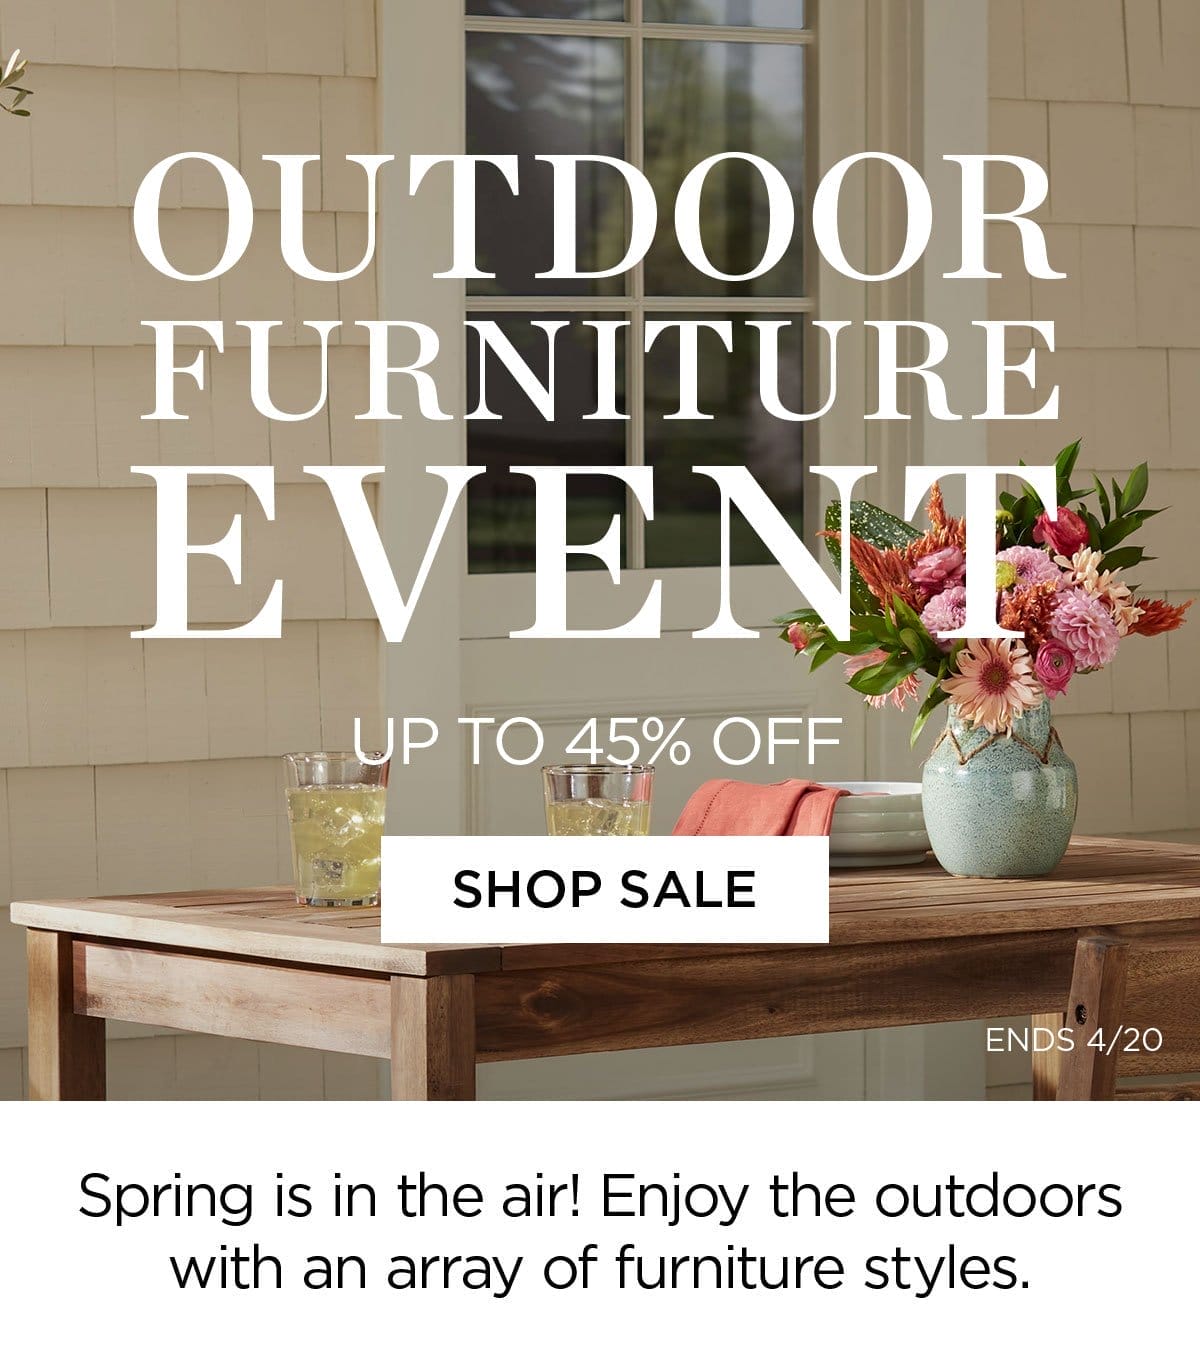 Outdoor Furniture Event - Up to 45% Off - Shop Sale - Ends 4/20 - Spring is in the air! Enjoy the outdoors with an array of furniture styles.